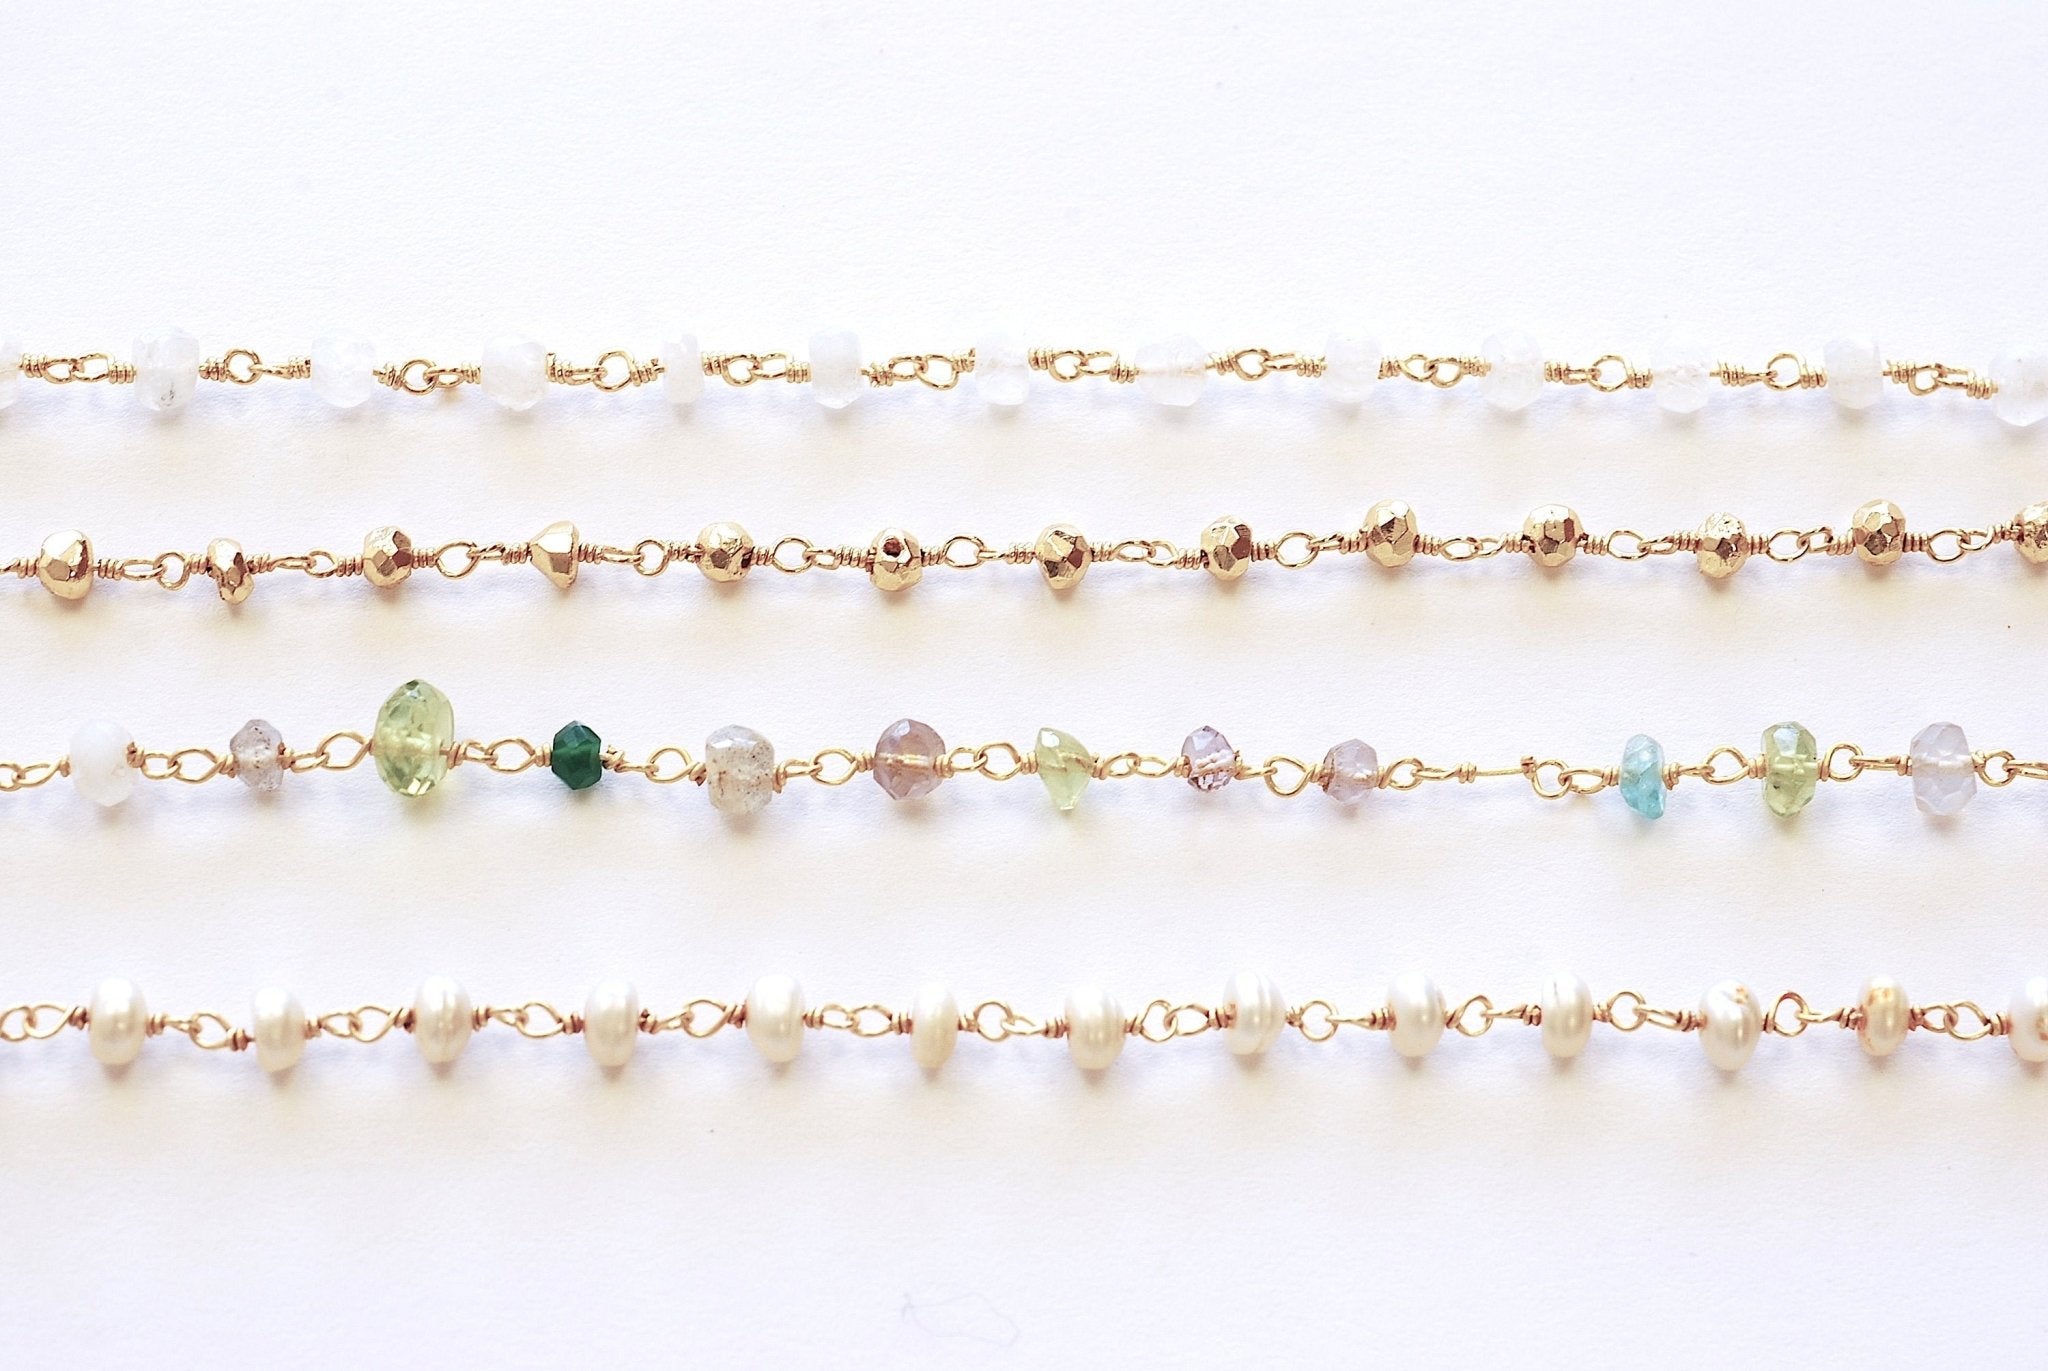 Gemstone Chain - Sterling Silver Gold Plated Chain Gemstone Freshwater Pearl Pyrite Disco White Tourmaline Beaded Wire Vermeil Chain - HarperCrown